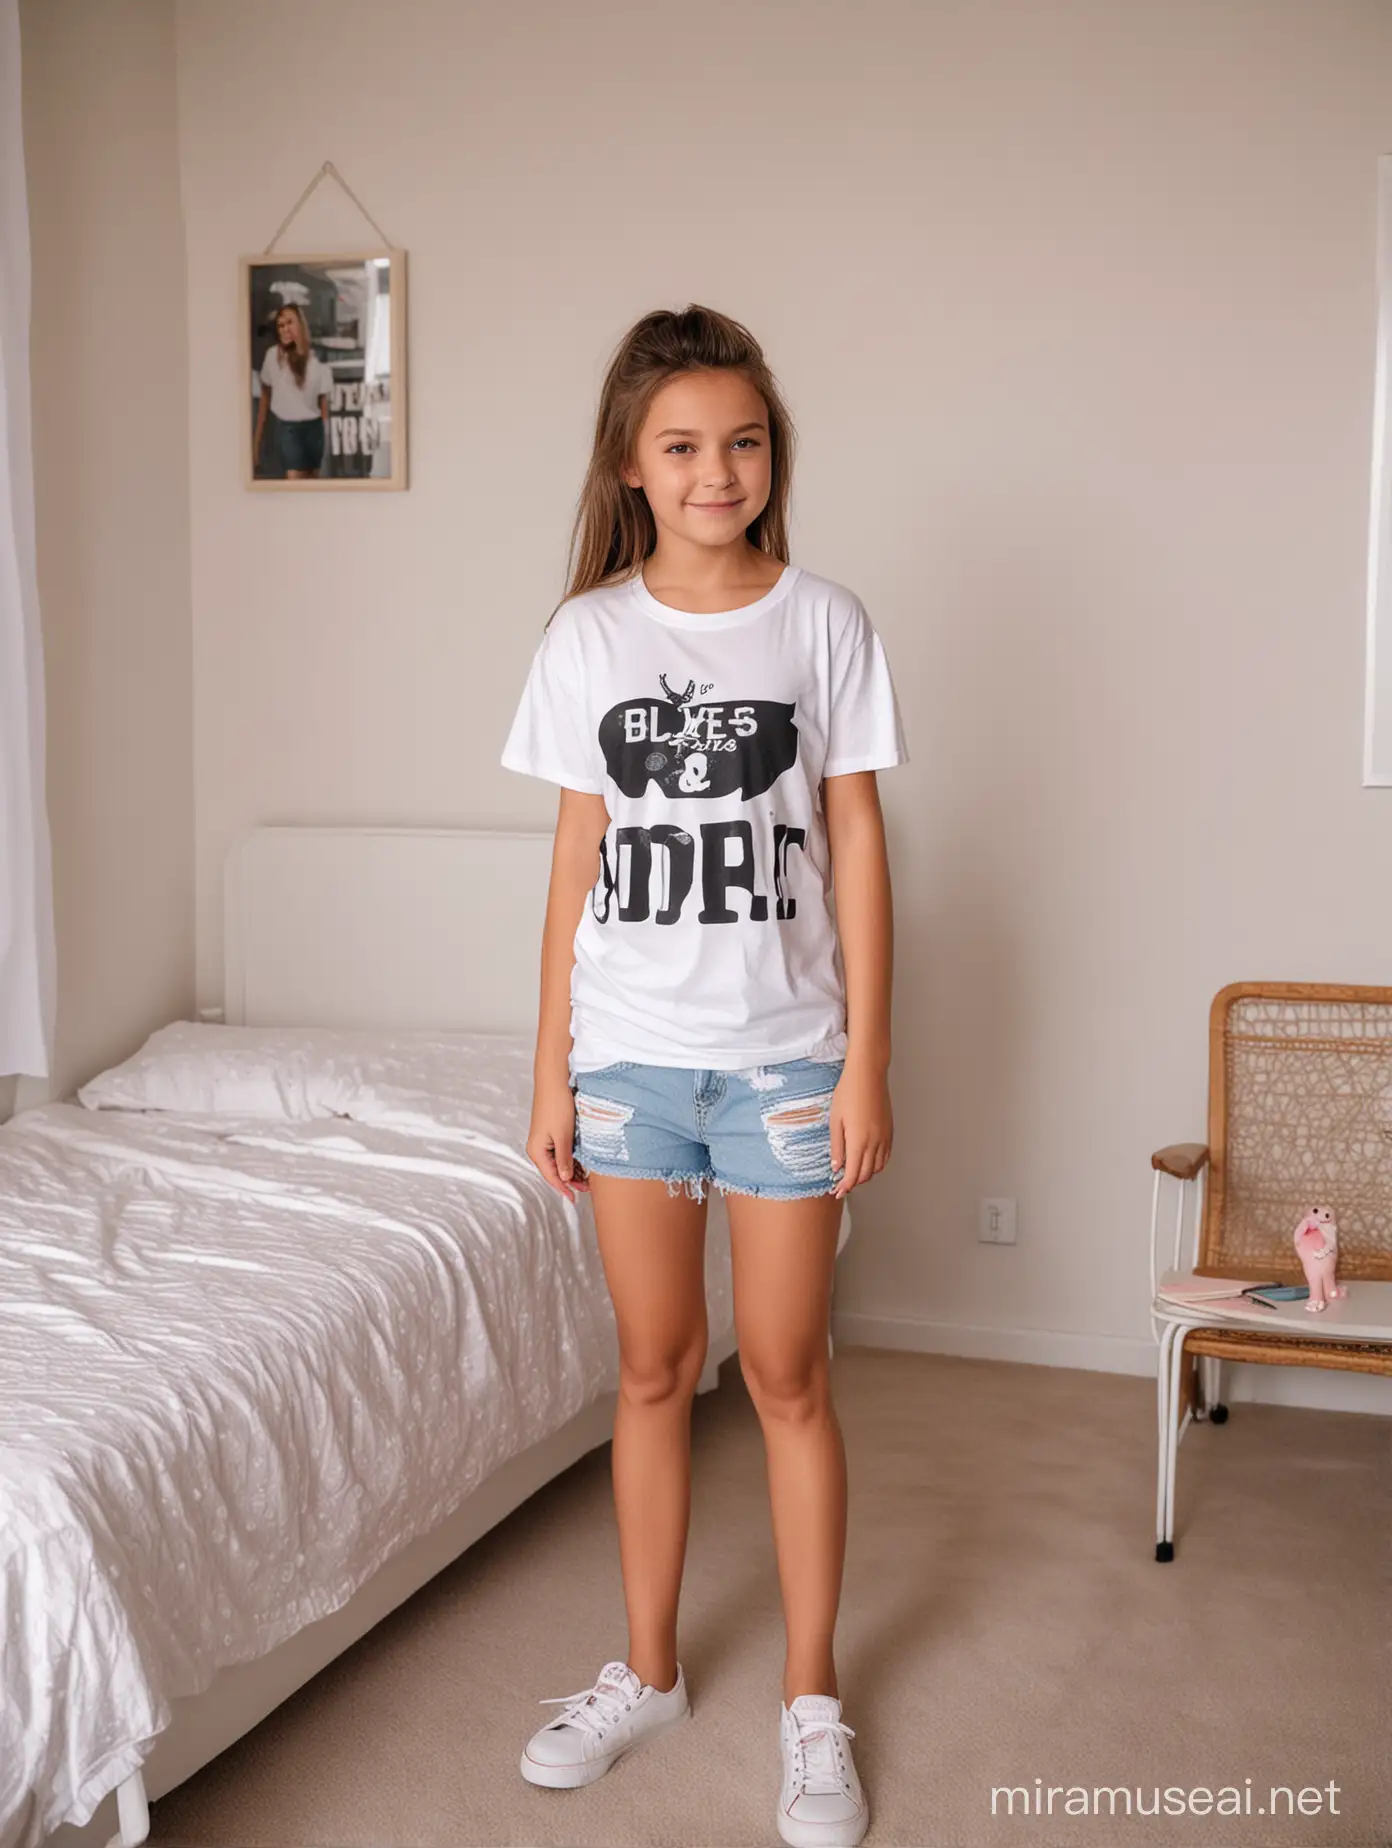 12 years old sweet cute adorable extremely cute wearing a T-shirt and shorts playing in her room full body full view cute room 